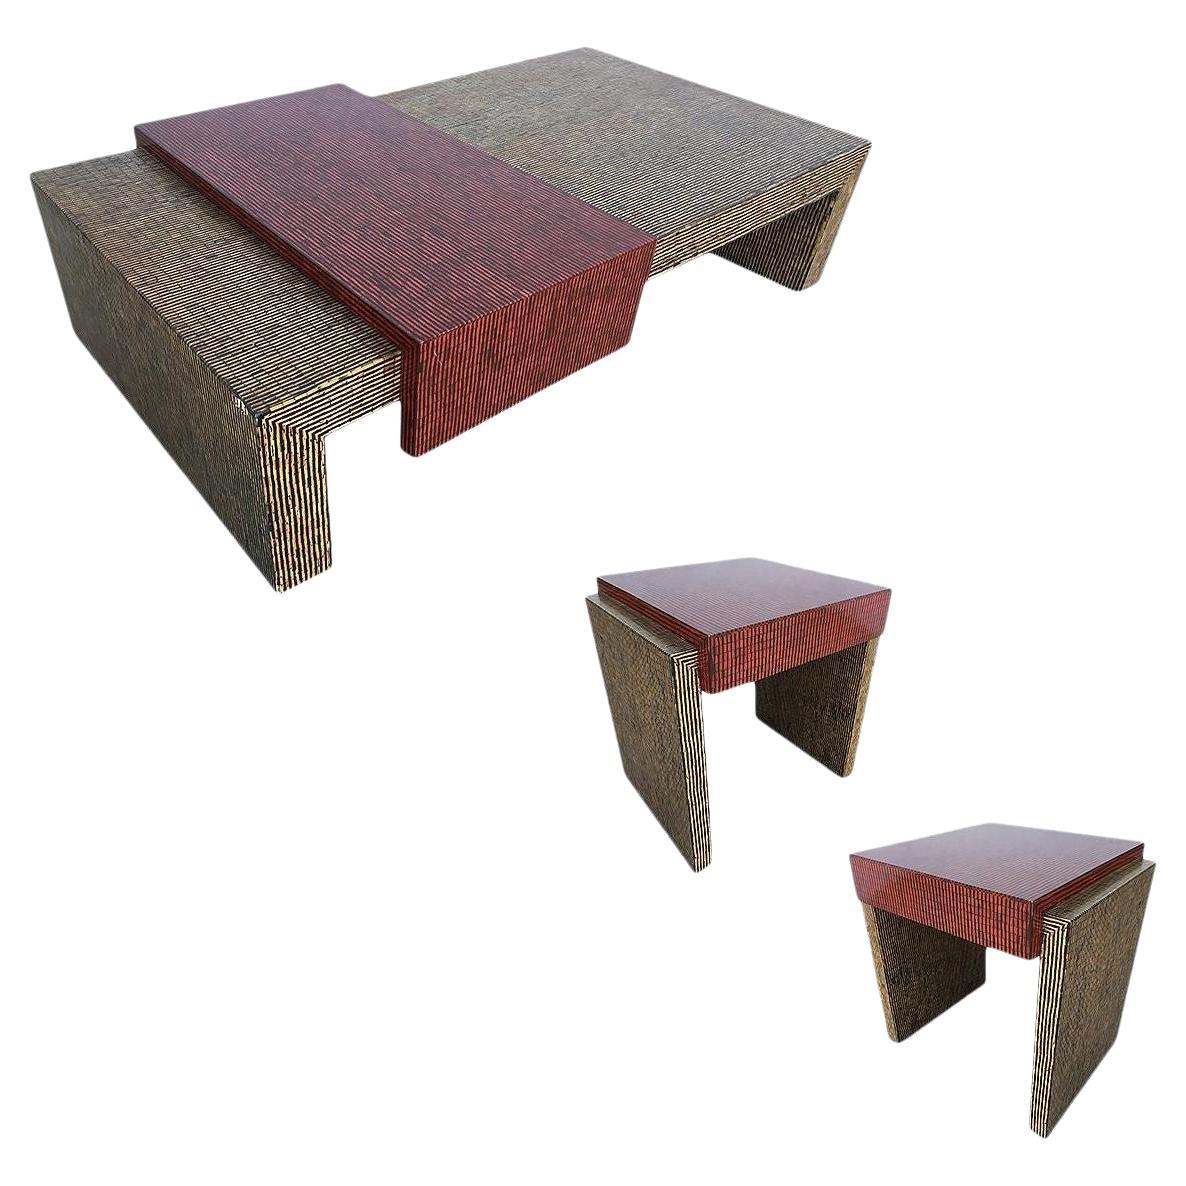 Two-Tone Cubist Style Side Table and Coffee Table Set, Set of 3